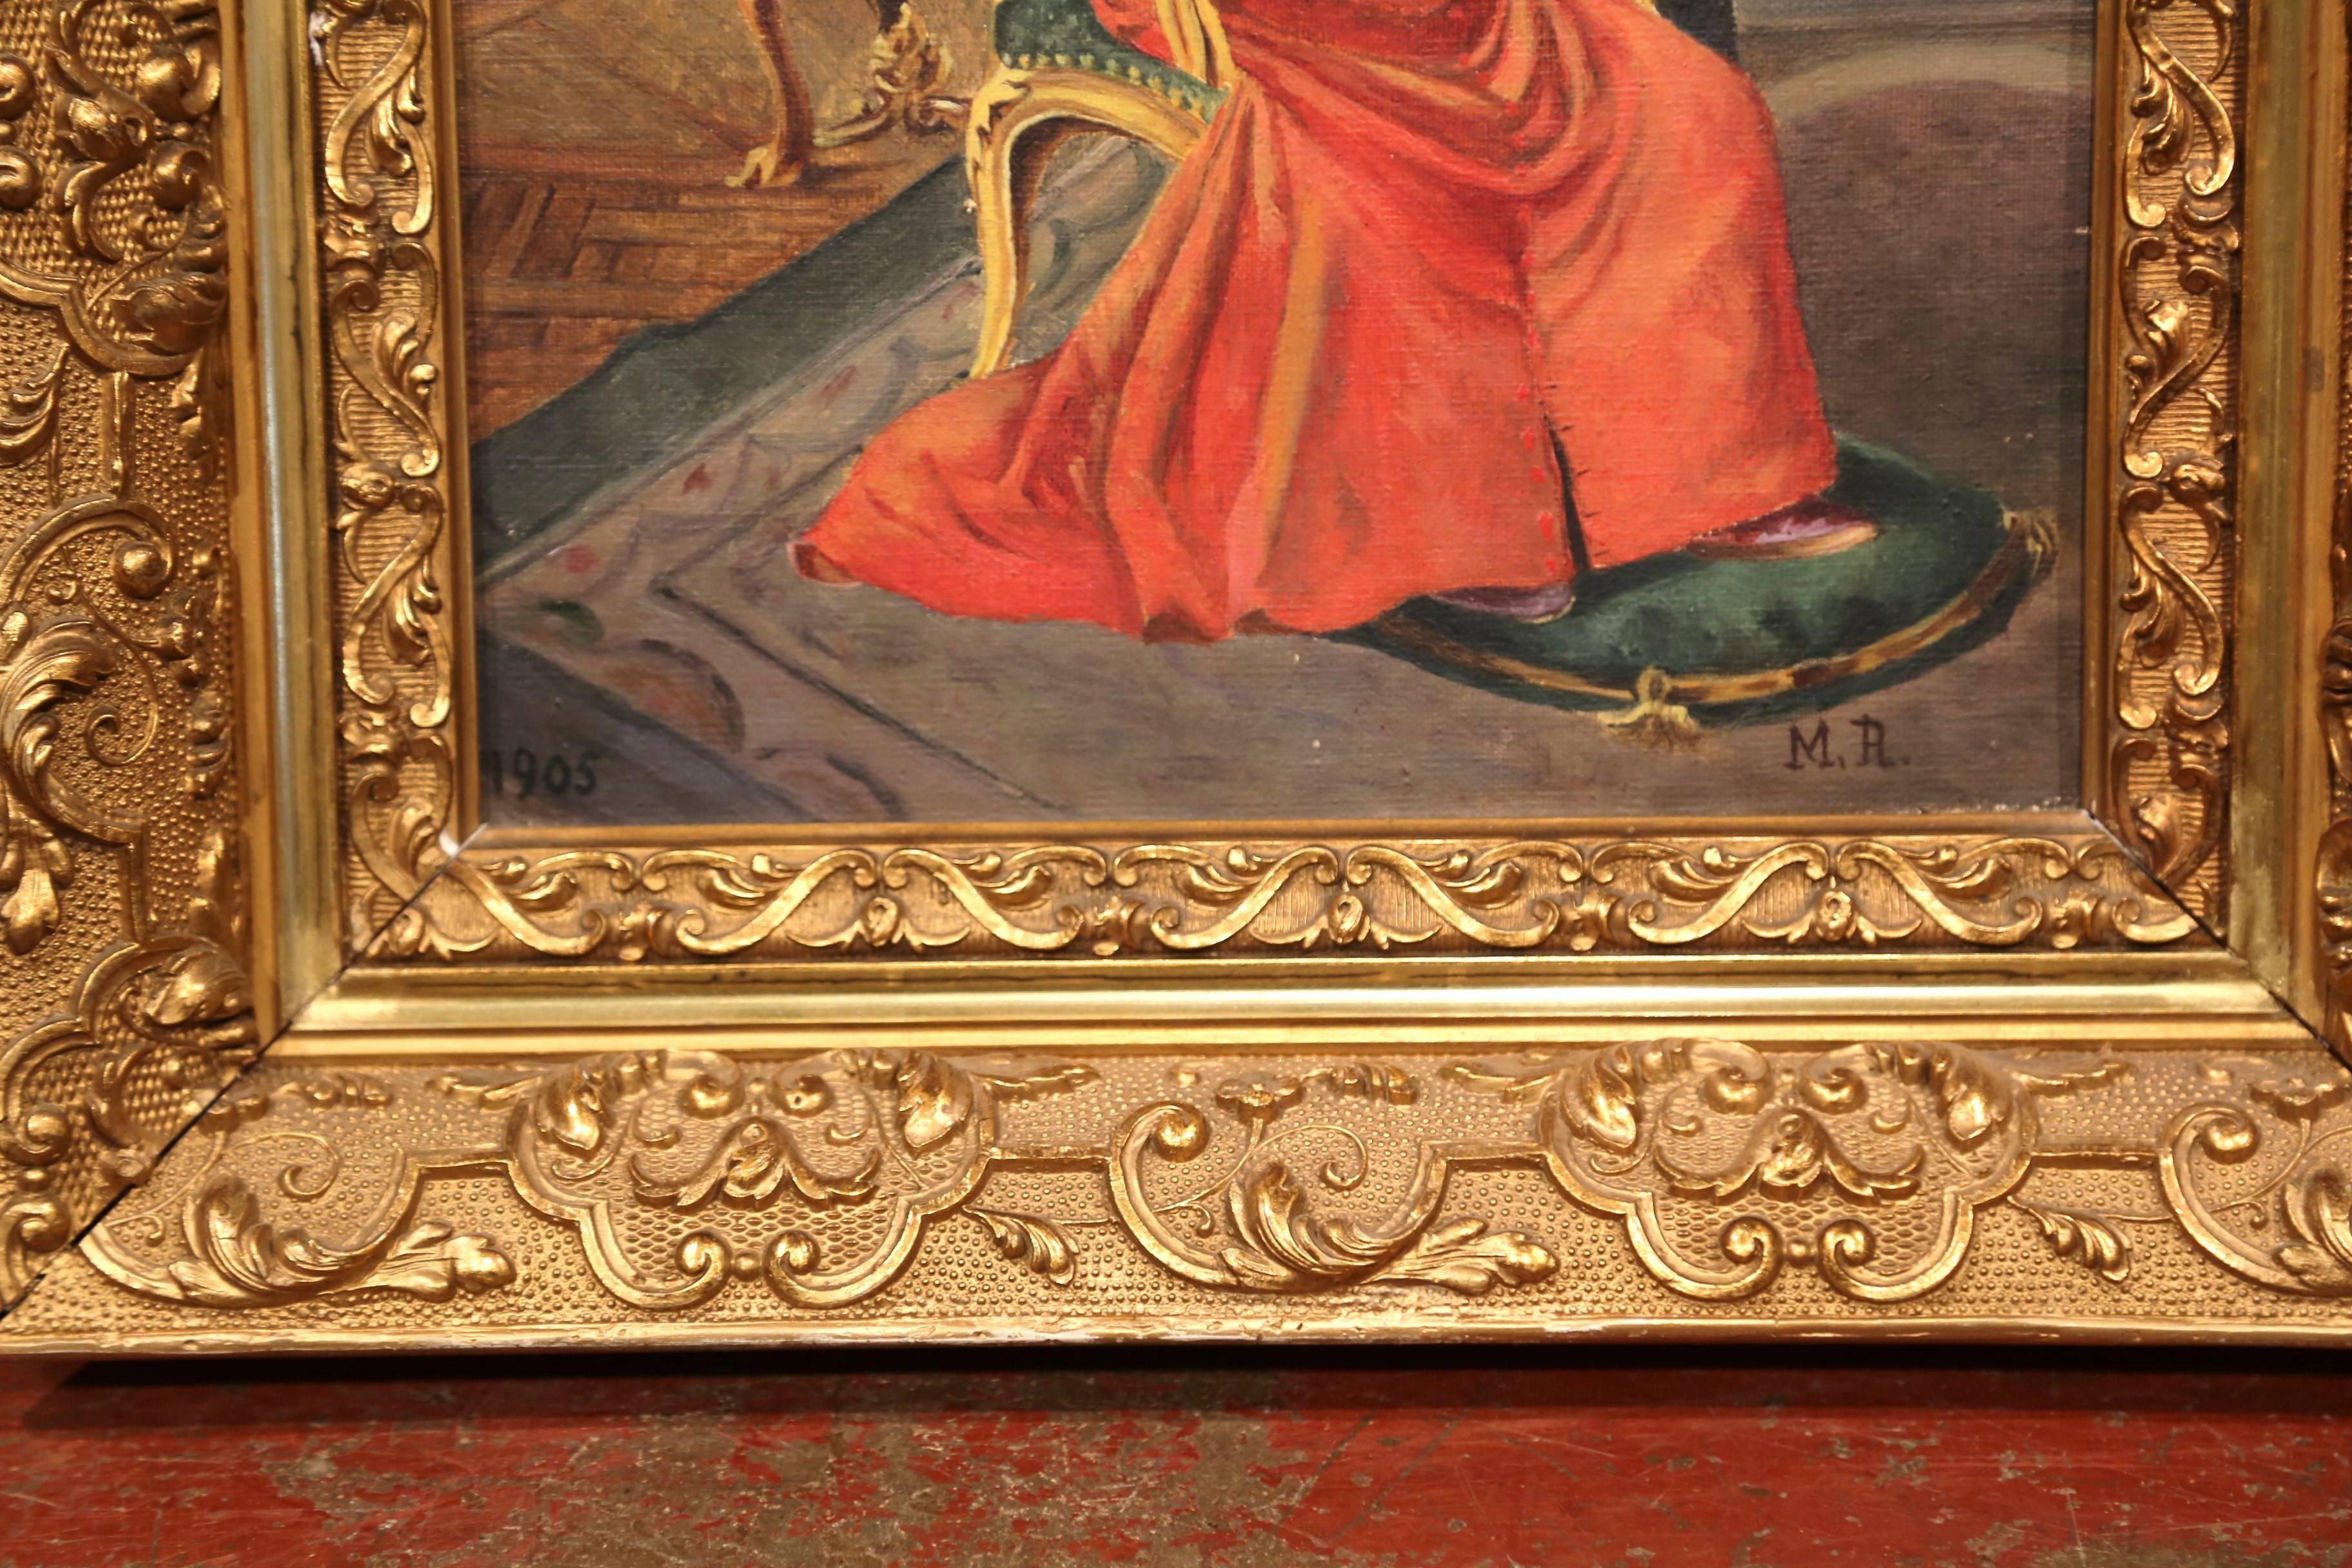 Early 20th Century French Painting with Priest and Cardinal Signed M. R. 1905 - Brown Figurative Painting by Unknown